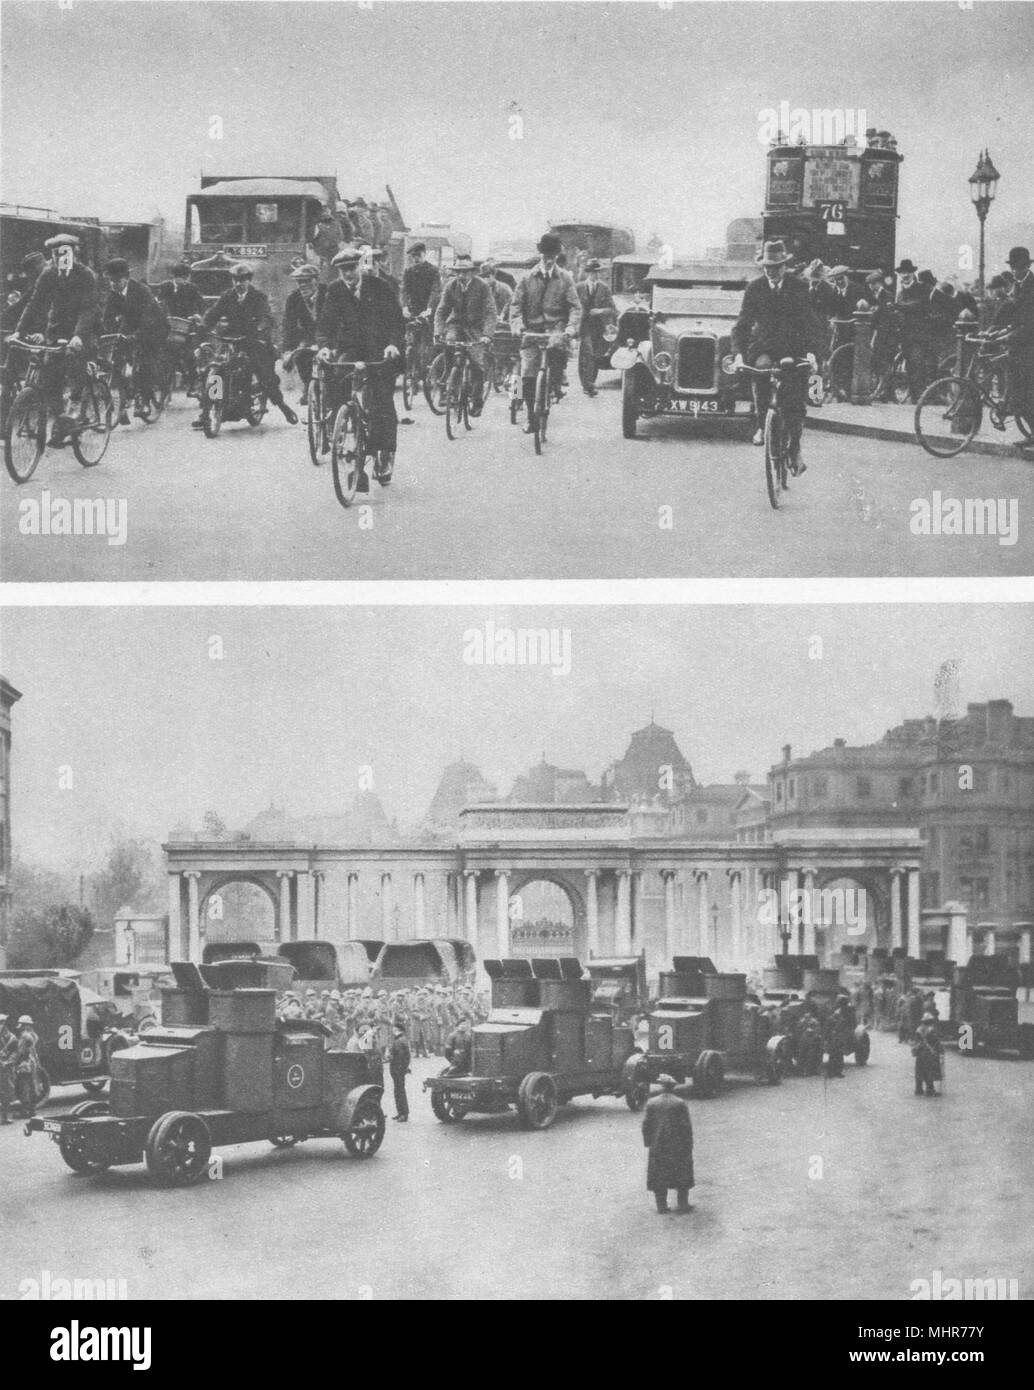 LONDON. General strike. Great strike. Cycling. Armoured cars 1926 old print Stock Photo